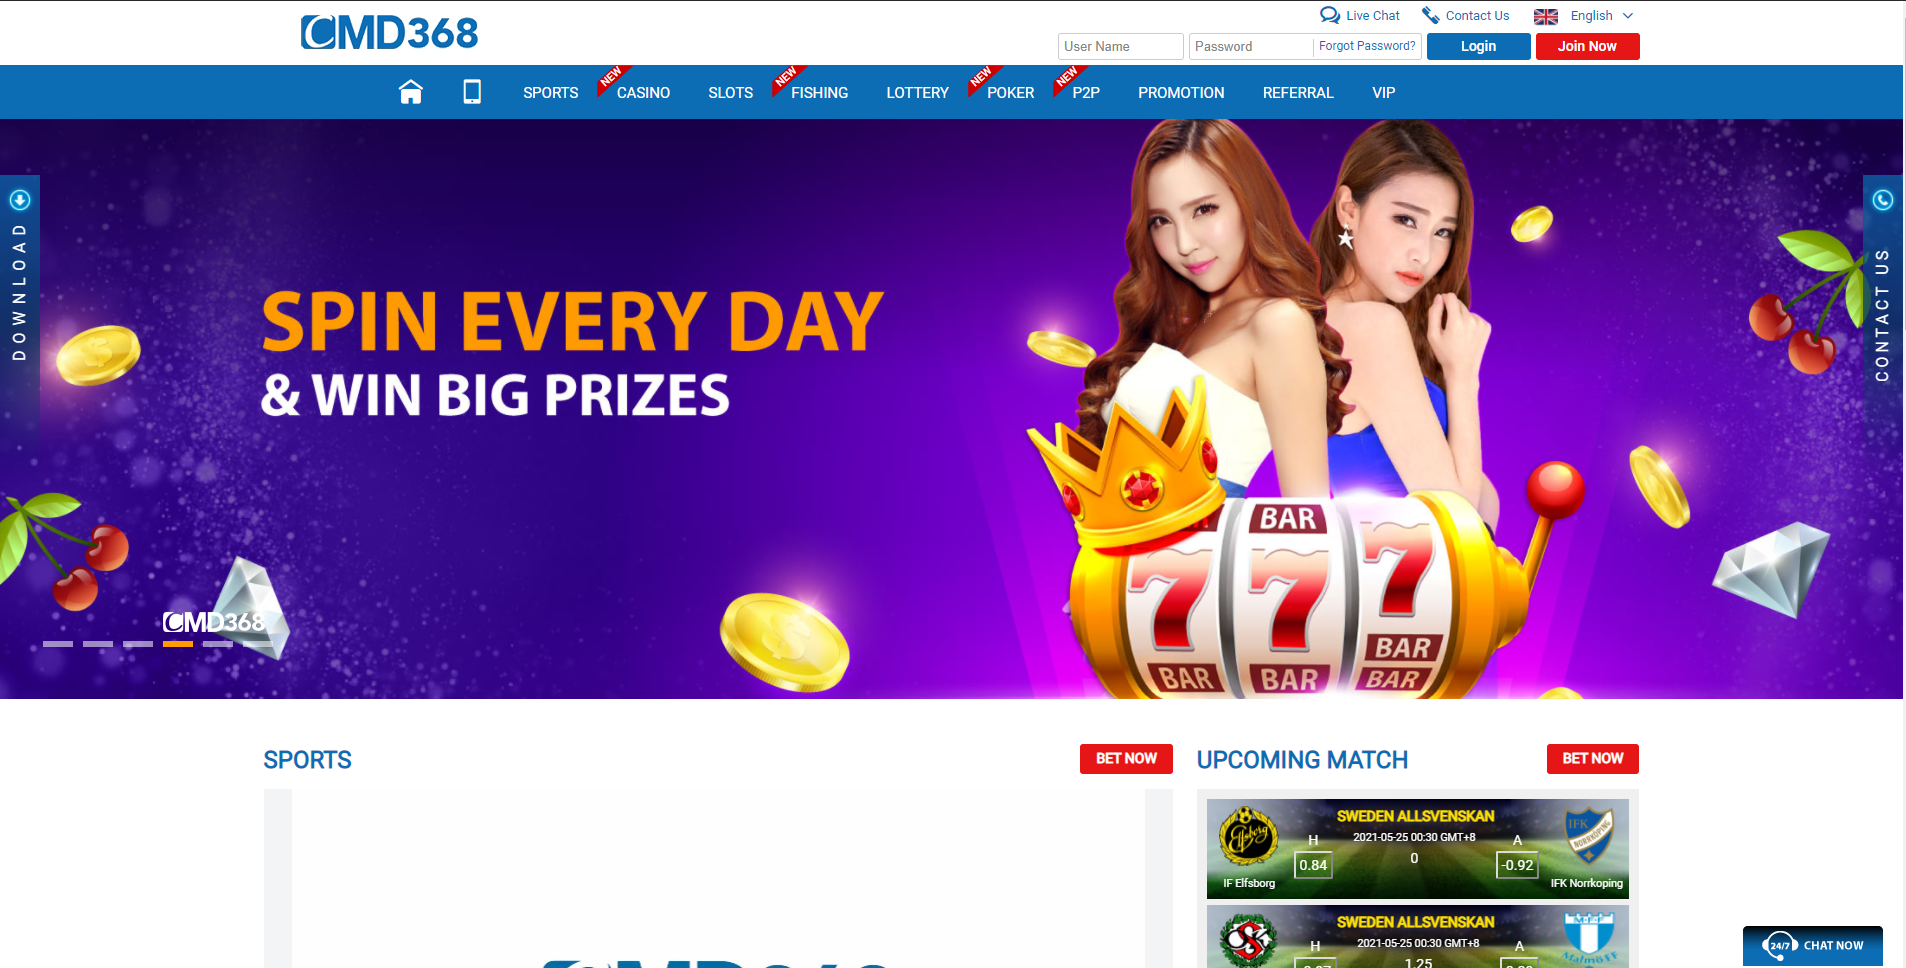 Why best online betting sites malaysia, best betting sites malaysia, online sports betting malaysia, betting sites malaysia, online betting in malaysia, malaysia online sports betting, online betting malaysia, sports betting malaysia, malaysia online betting, Is A Tactic Not A Strategy